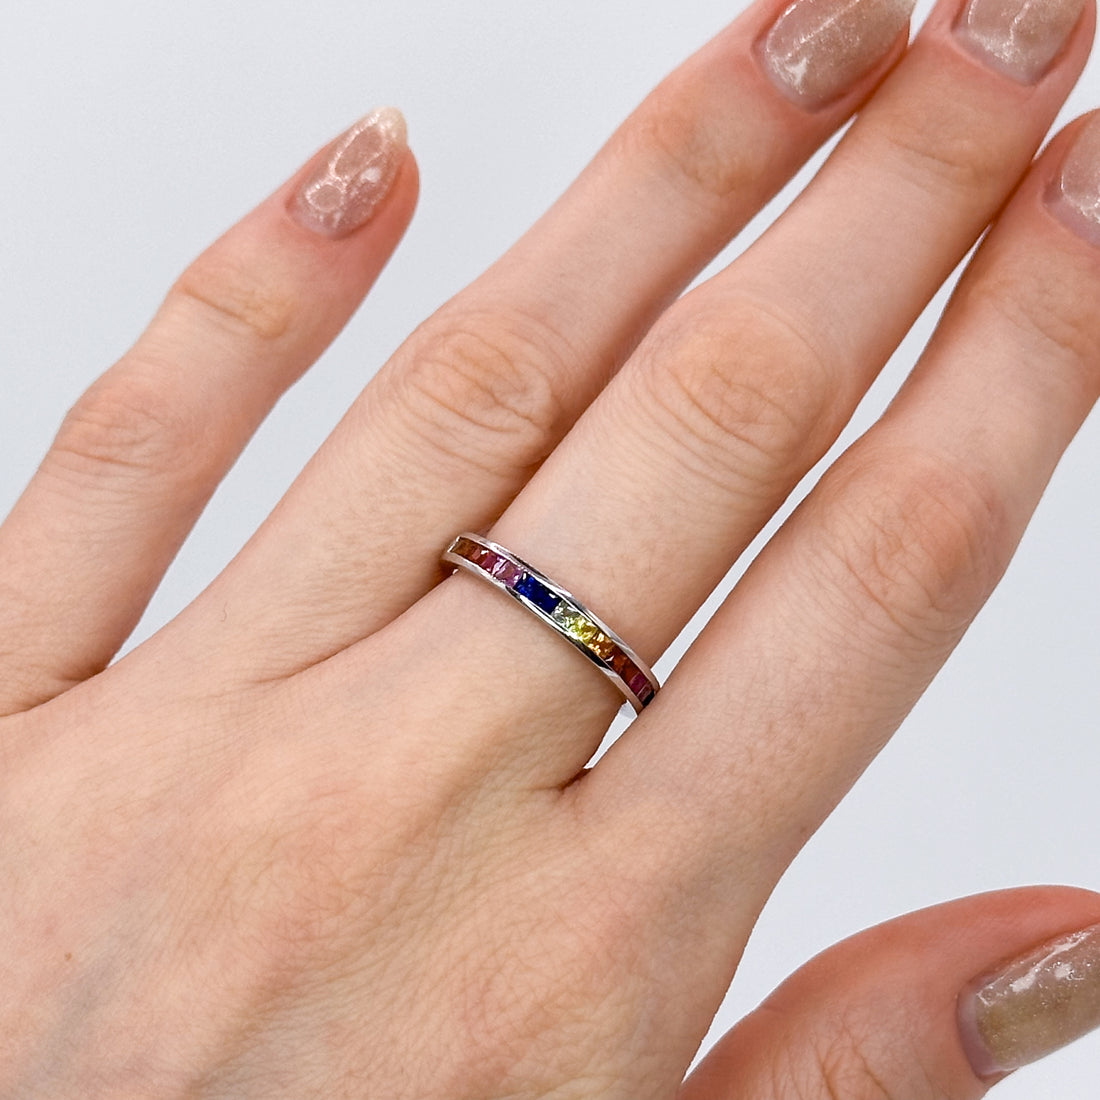 Rainbow Sapphire Eternity Ring in White Gold